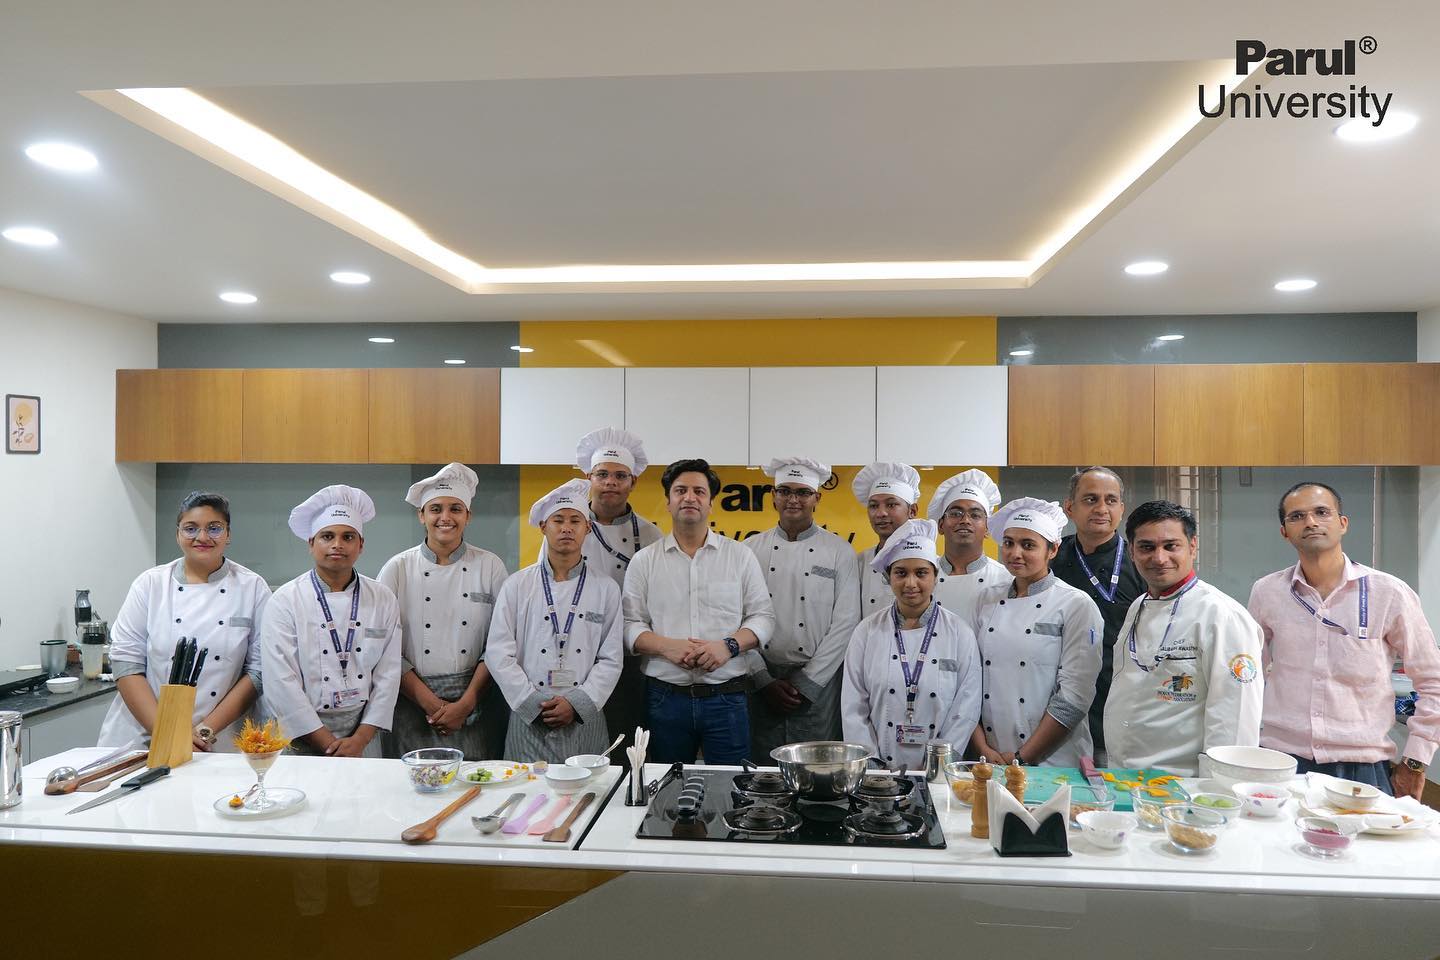 Masterchef India fame Chef Kunal Kapur demonstrates his way of the kitchen and shares his culinary insights with the students of PU